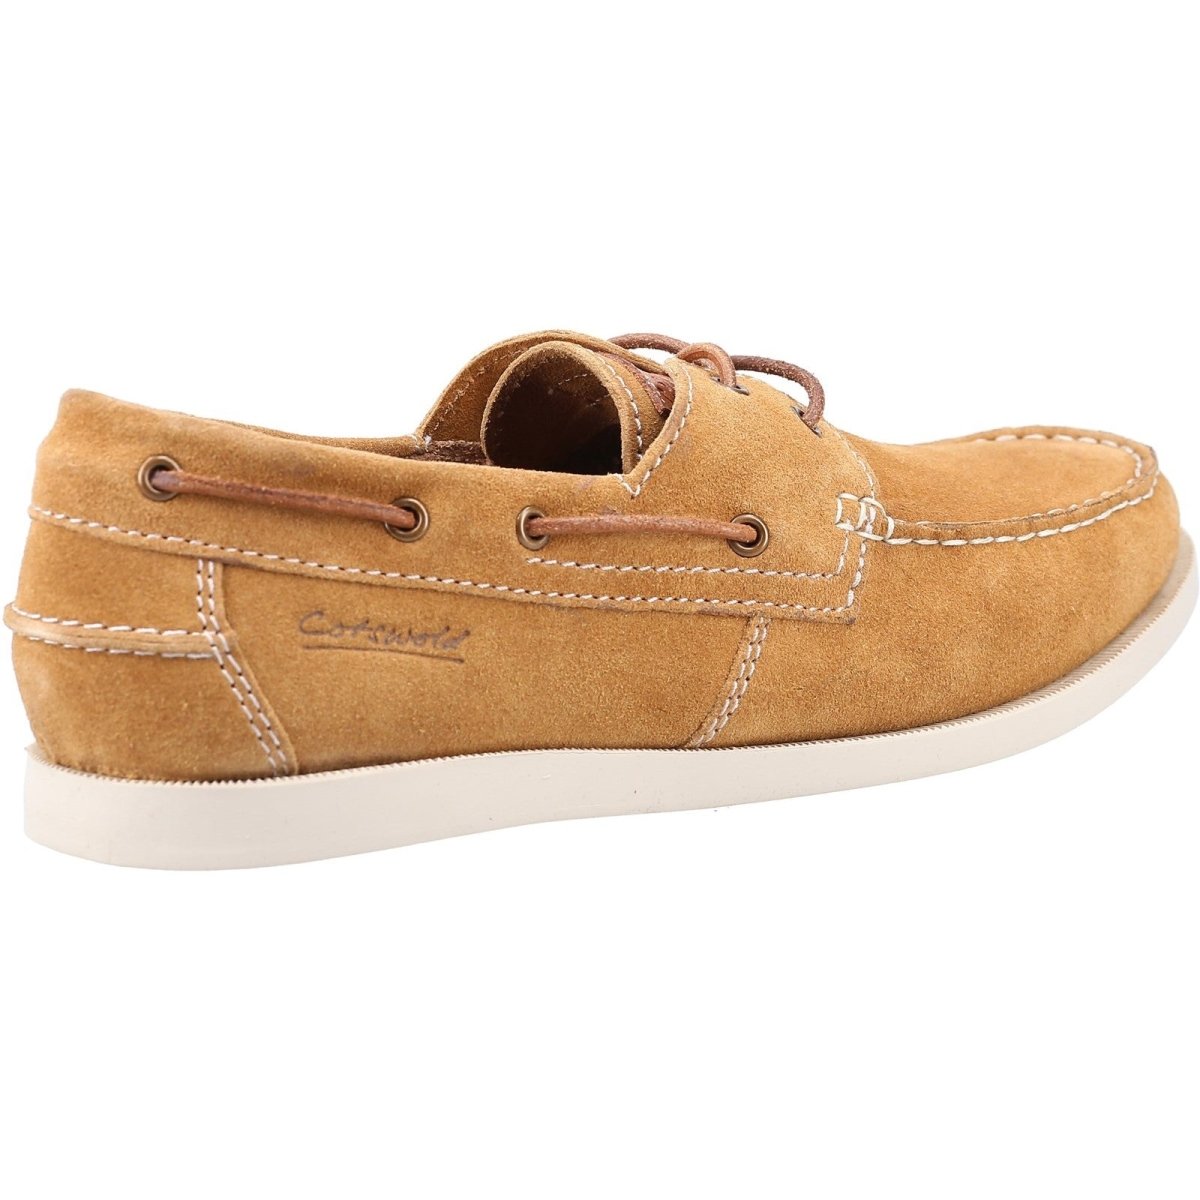 Cotswold Mitcheldean Mens Suede Moccasin Boat Shoes - Shoe Store Direct